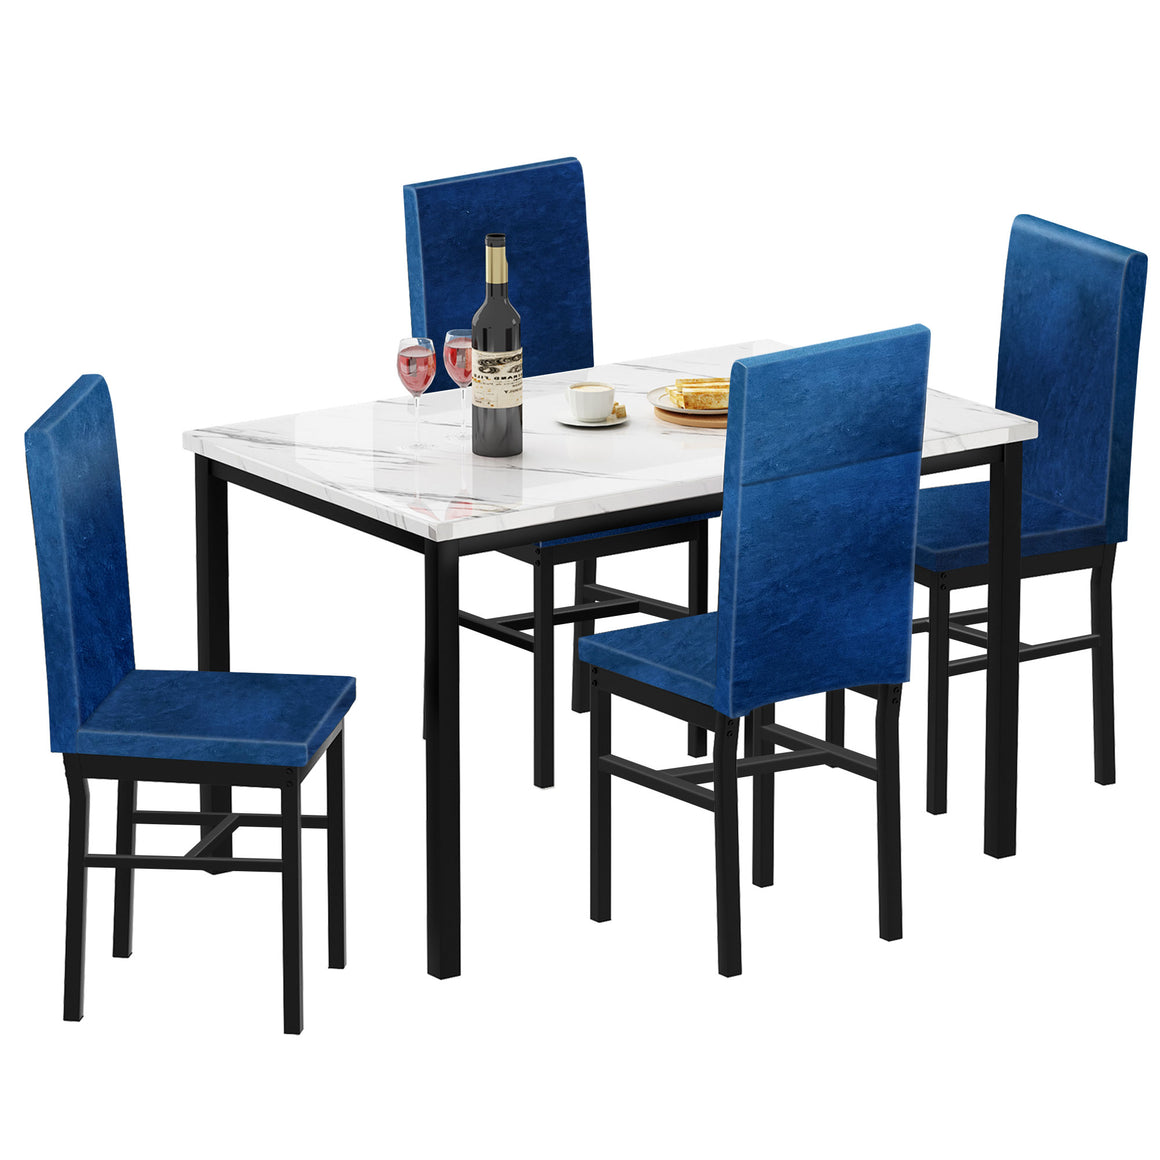 uhomepro 5 Pieces Dining Table Set, Marble Top Dining Table and Chairs Set for 4 Person, Upgraded Sturdy Iron Frame Dining Room Table Set with 4 Velvet Upholstered Chairs for Small Dining Room